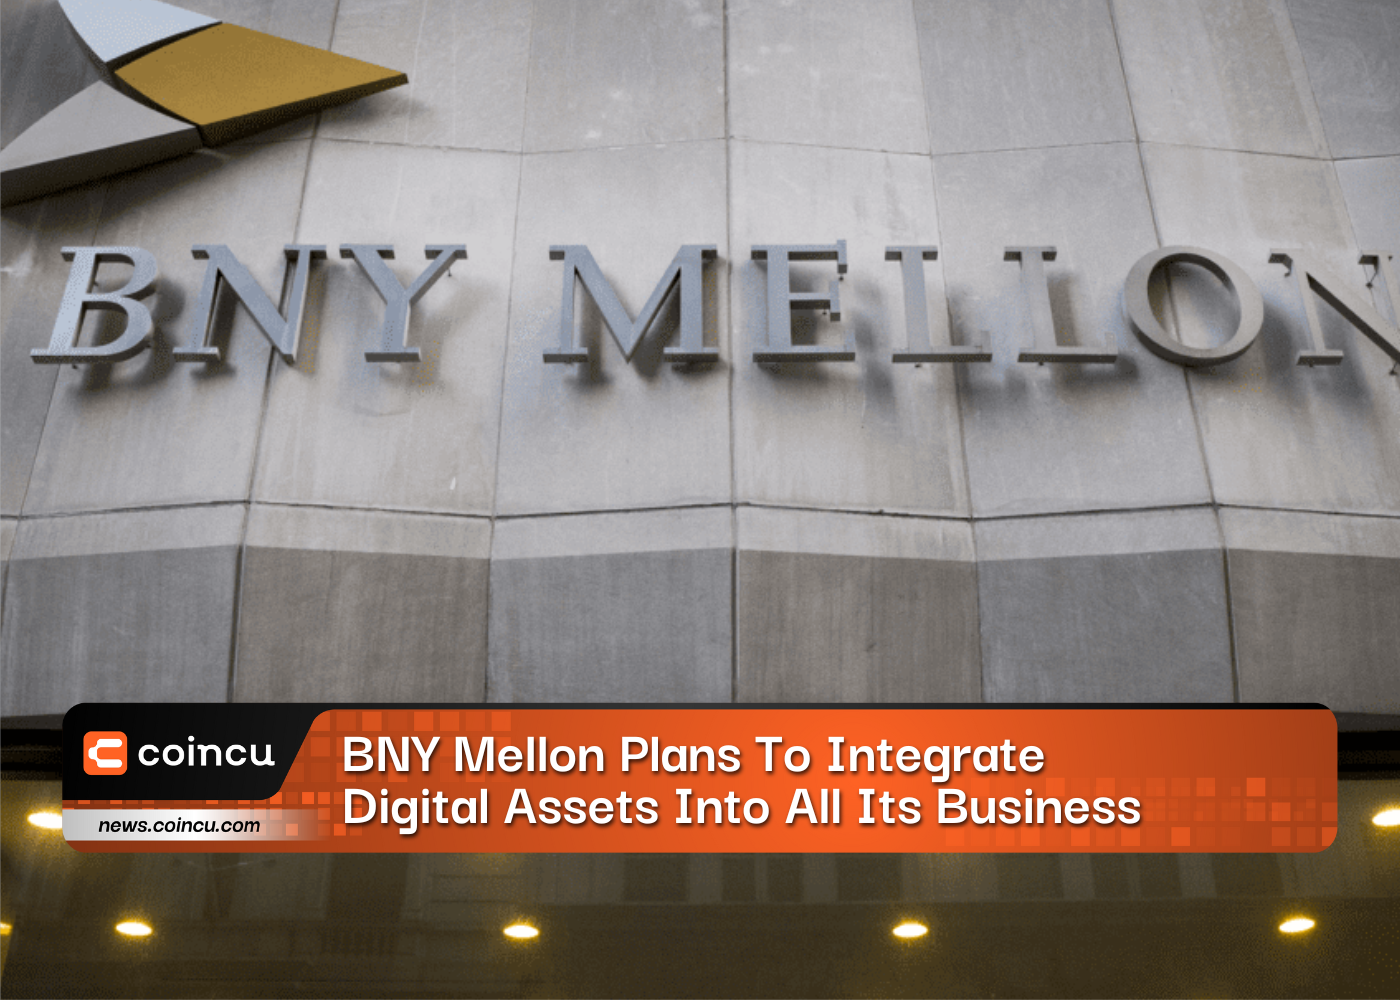 BNY Mellon Plans To Integrate Digital Assets Into All Its Business